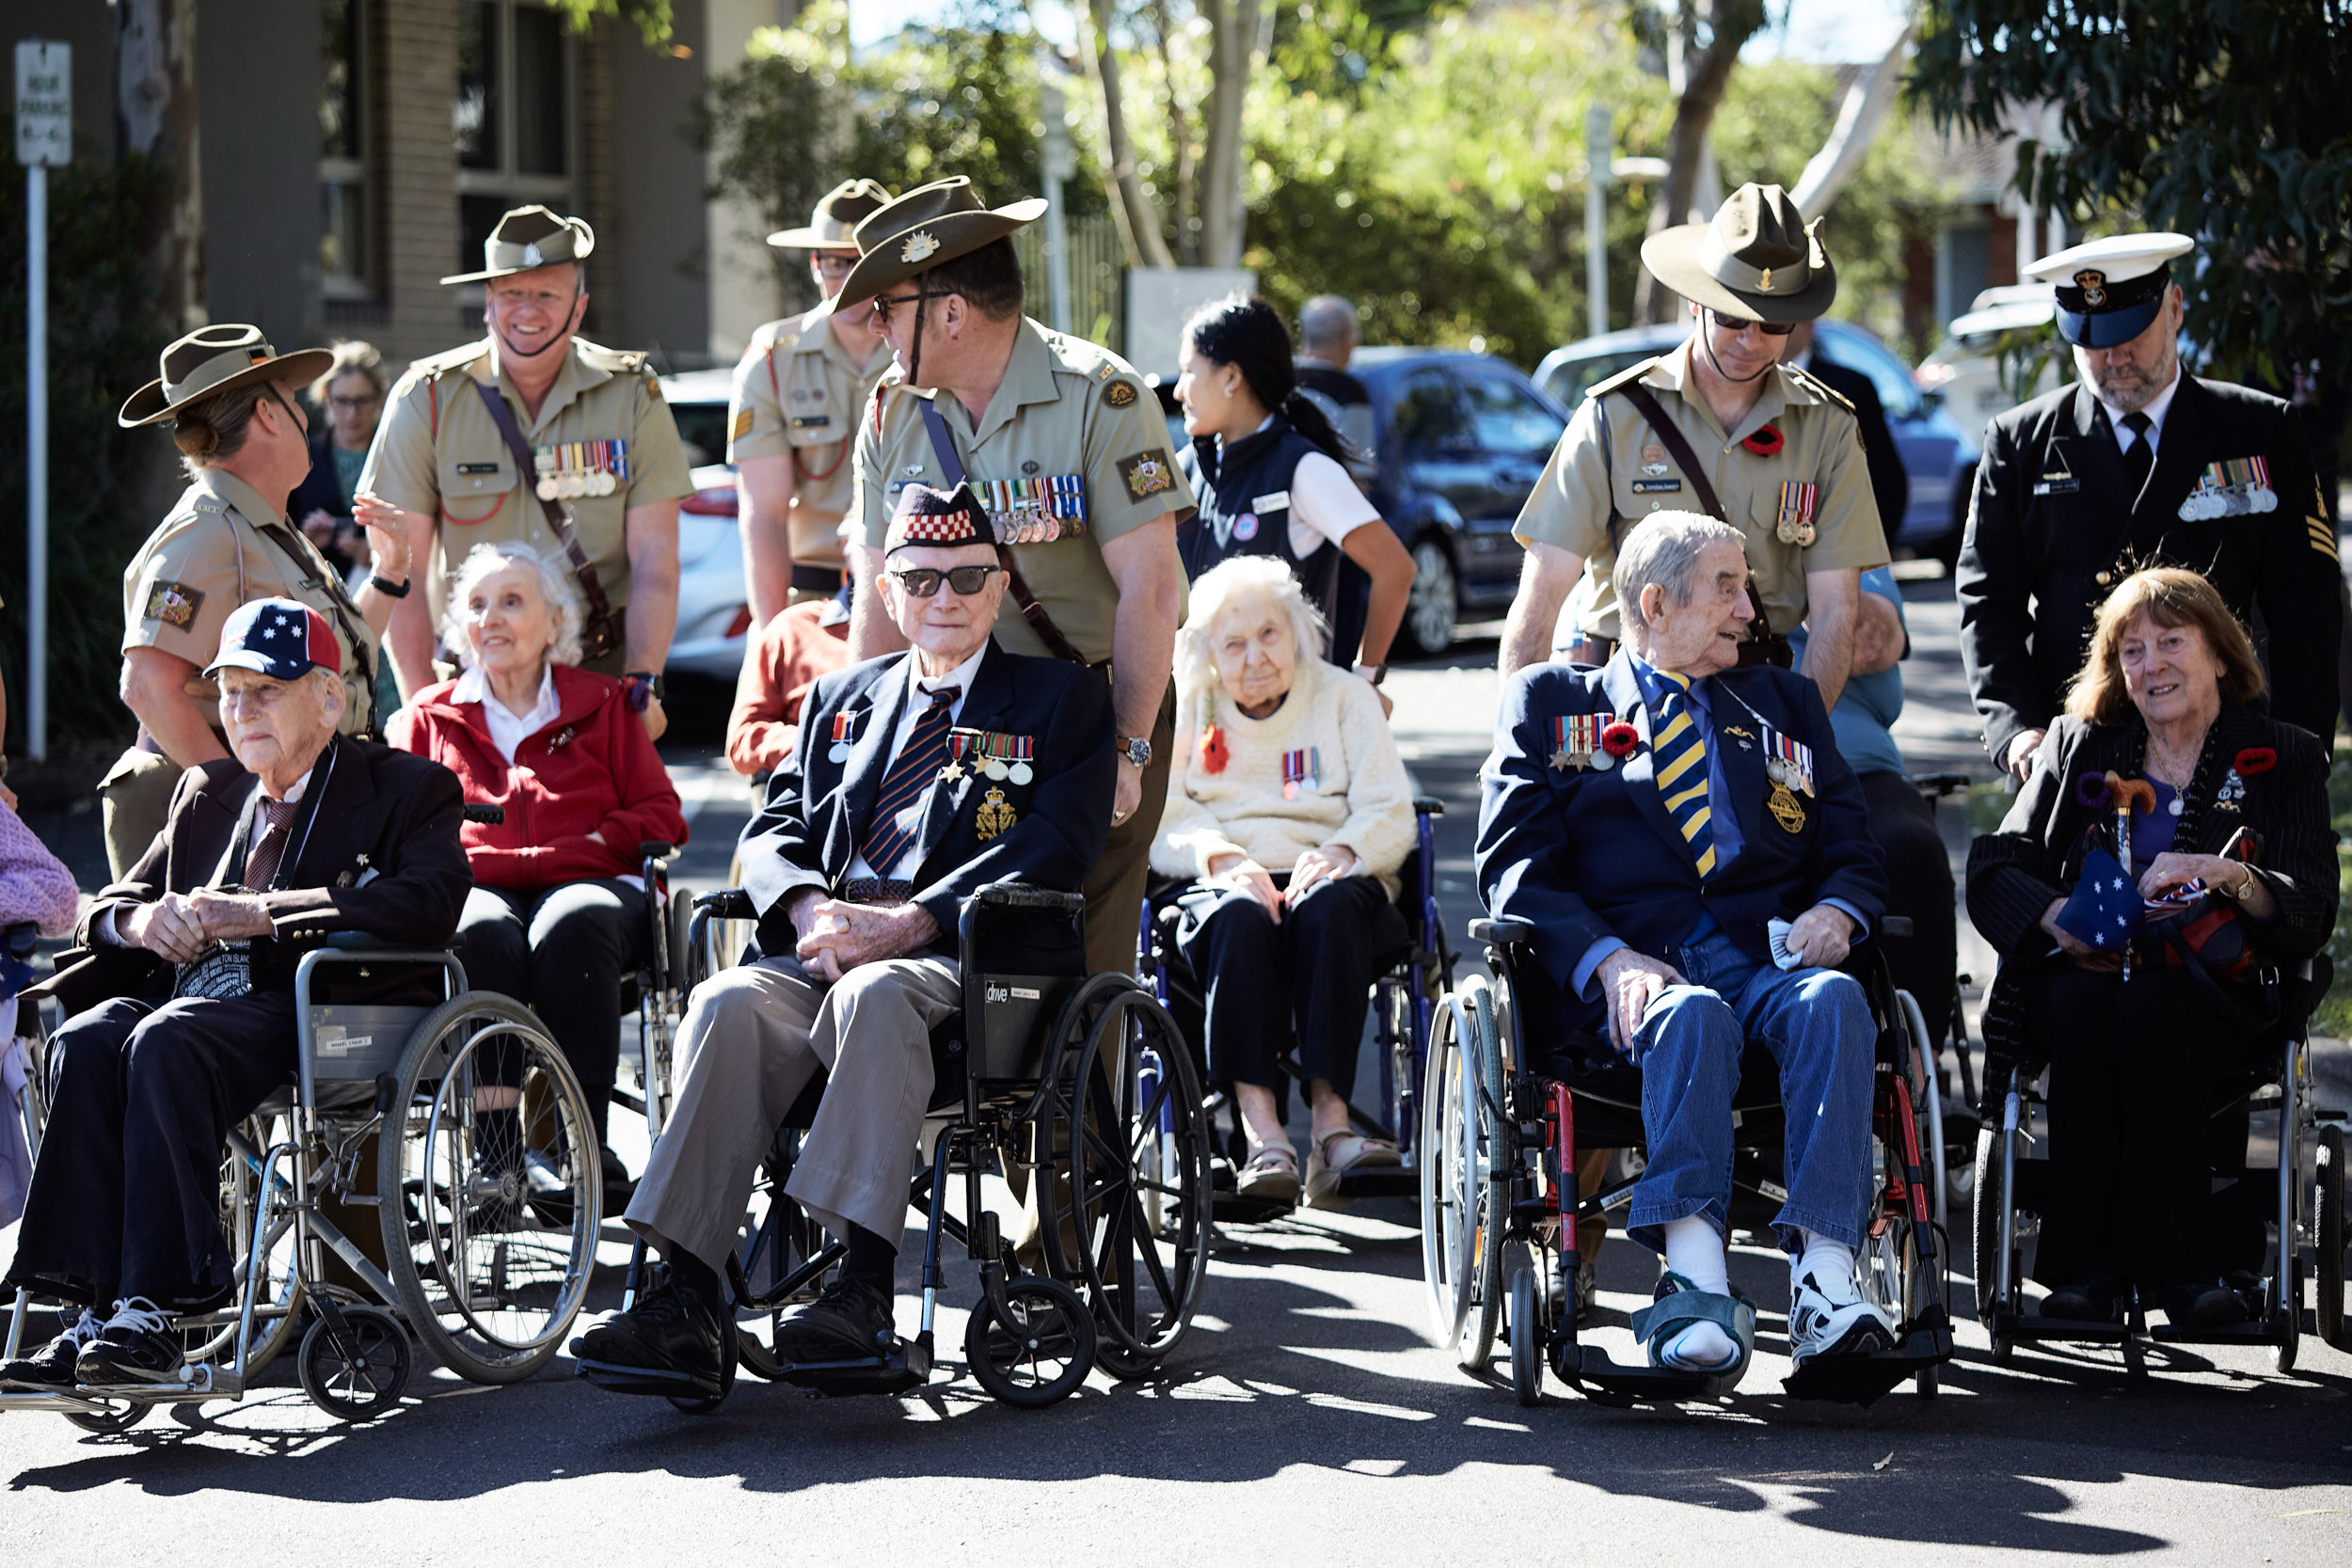 RSLL_MSL_Web_062 | RSL LifeCare - provide care and service to war veterans, retirement villages and accommodation, aged care services and assisted living